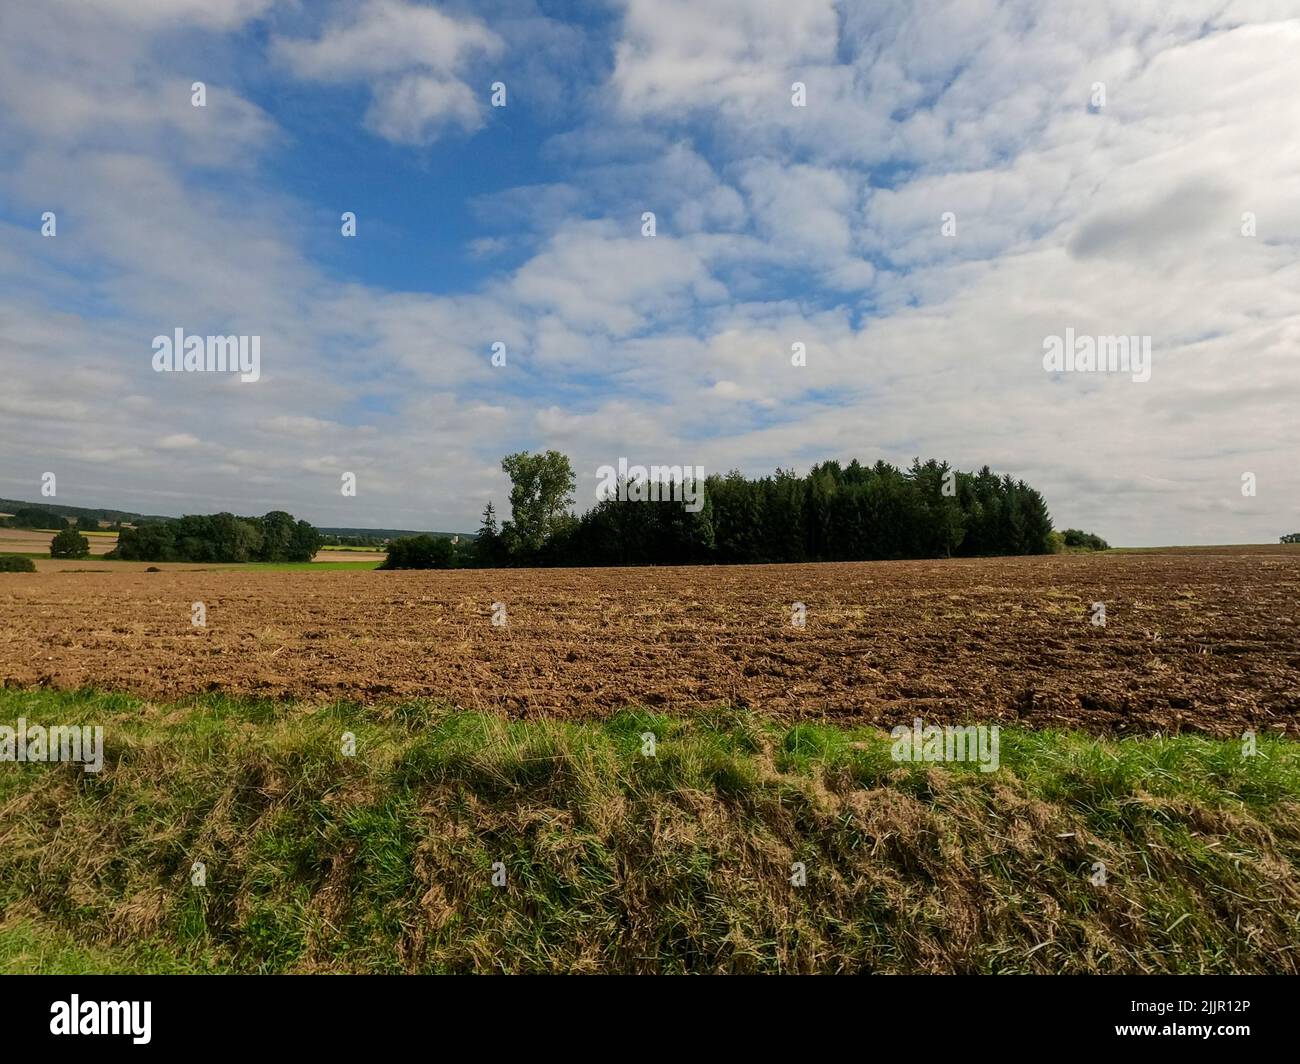 The plants and the crops in the valley on a blue cloudy sky background Stock Photo